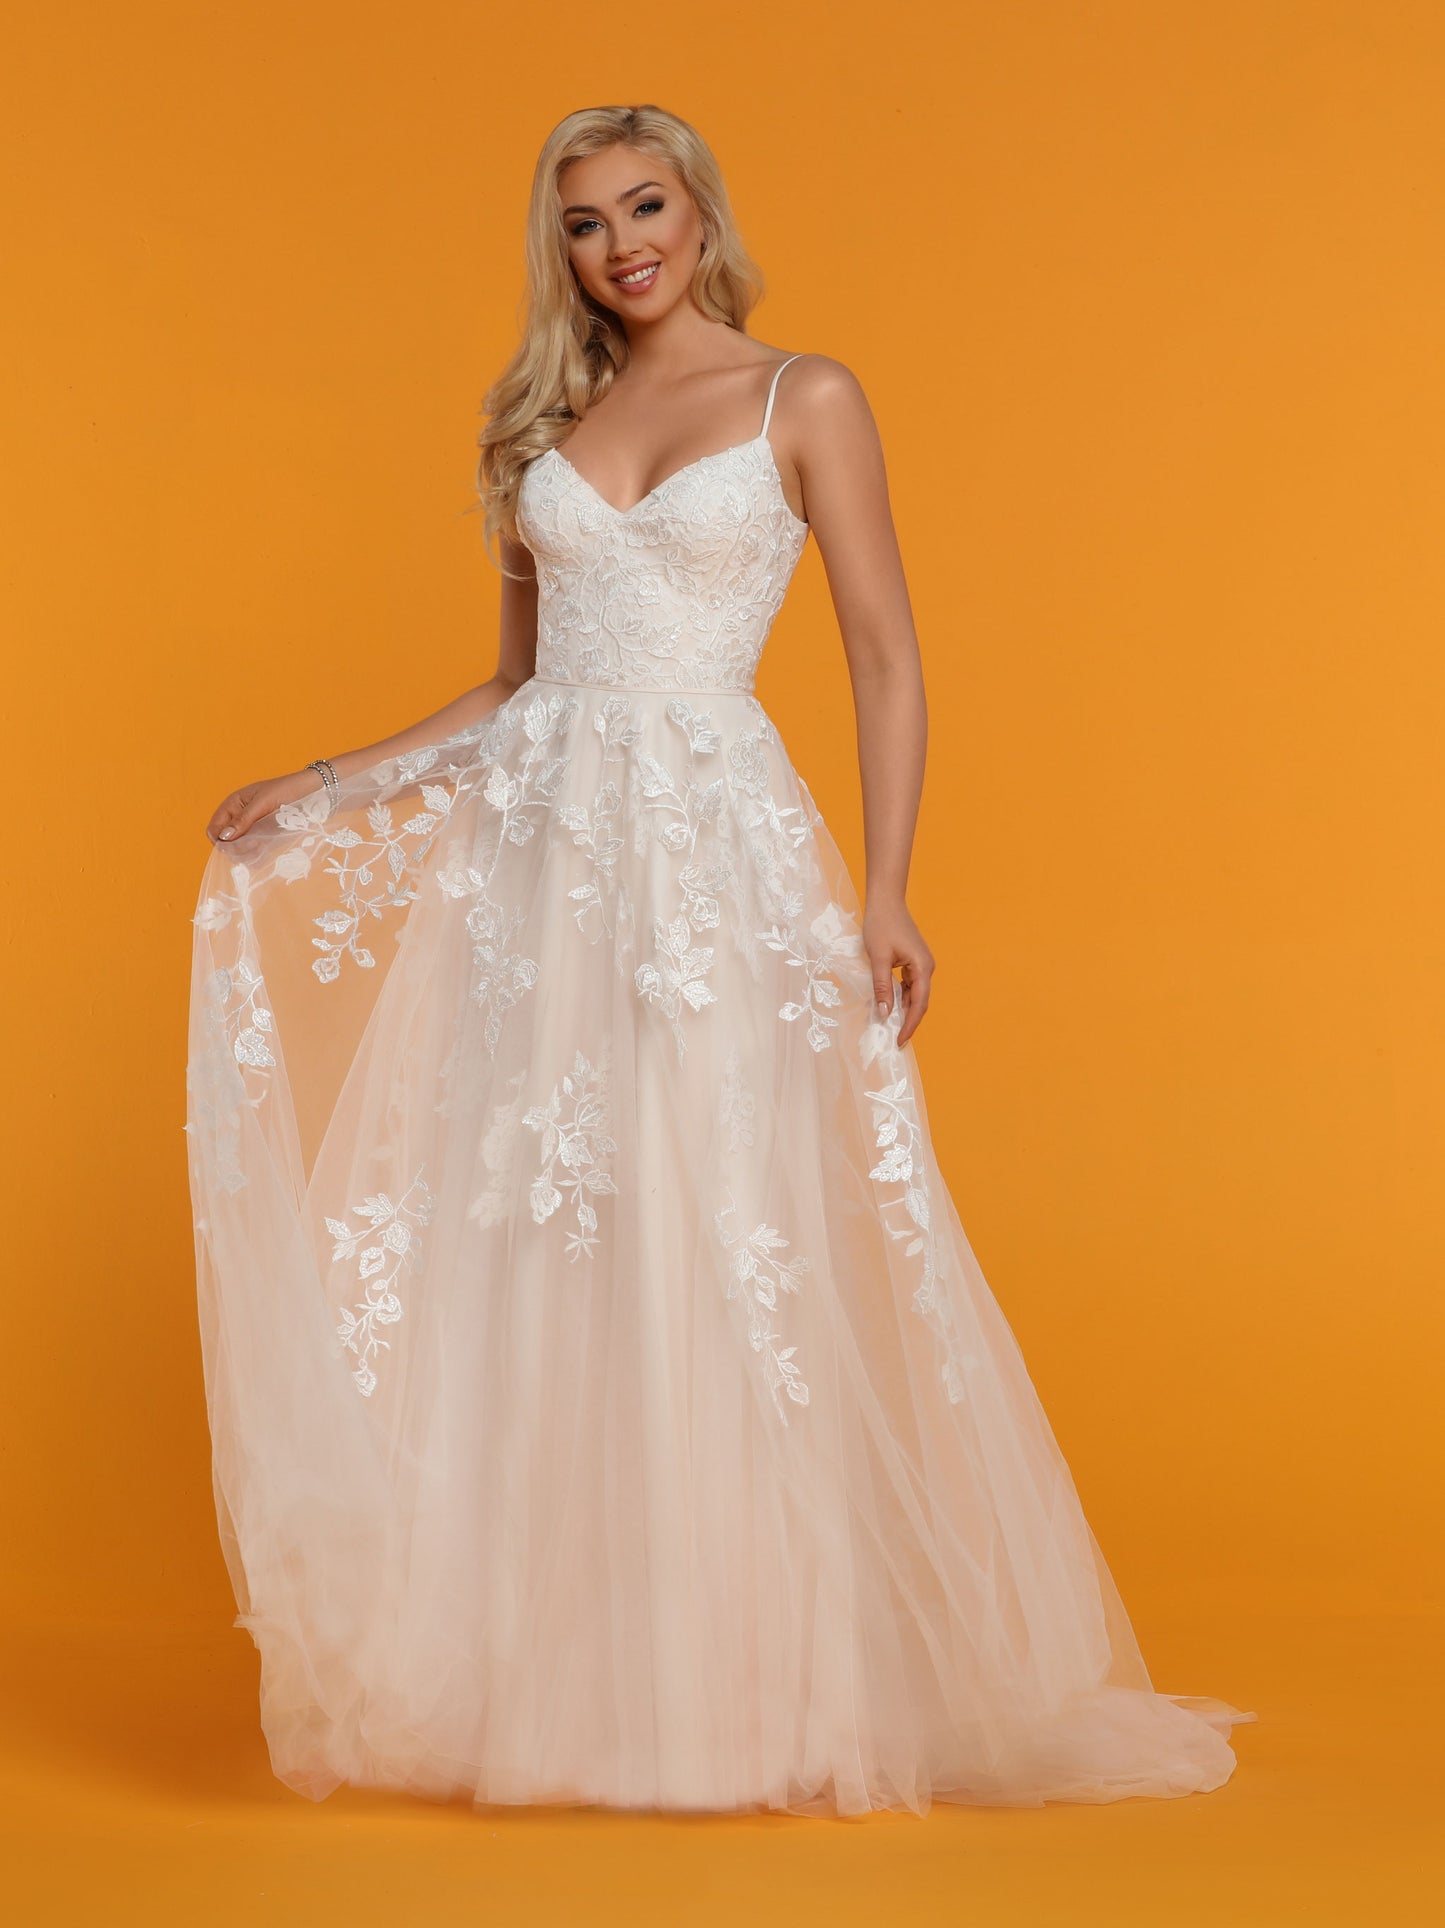 Davinci Bridal 50536 is a soft tulle A Line Wedding Dress Featuring Hand Embellished Lace Over Tulle. V Neckline with spaghetti straps and an open V Back. Long tulle train.  Available for 1-2 Week Delivery!!!  Available Sizes: 2,4,6,8,10,12,14,16,18,20  Available Colors: Ivory/Blush, Ivory/Ivory